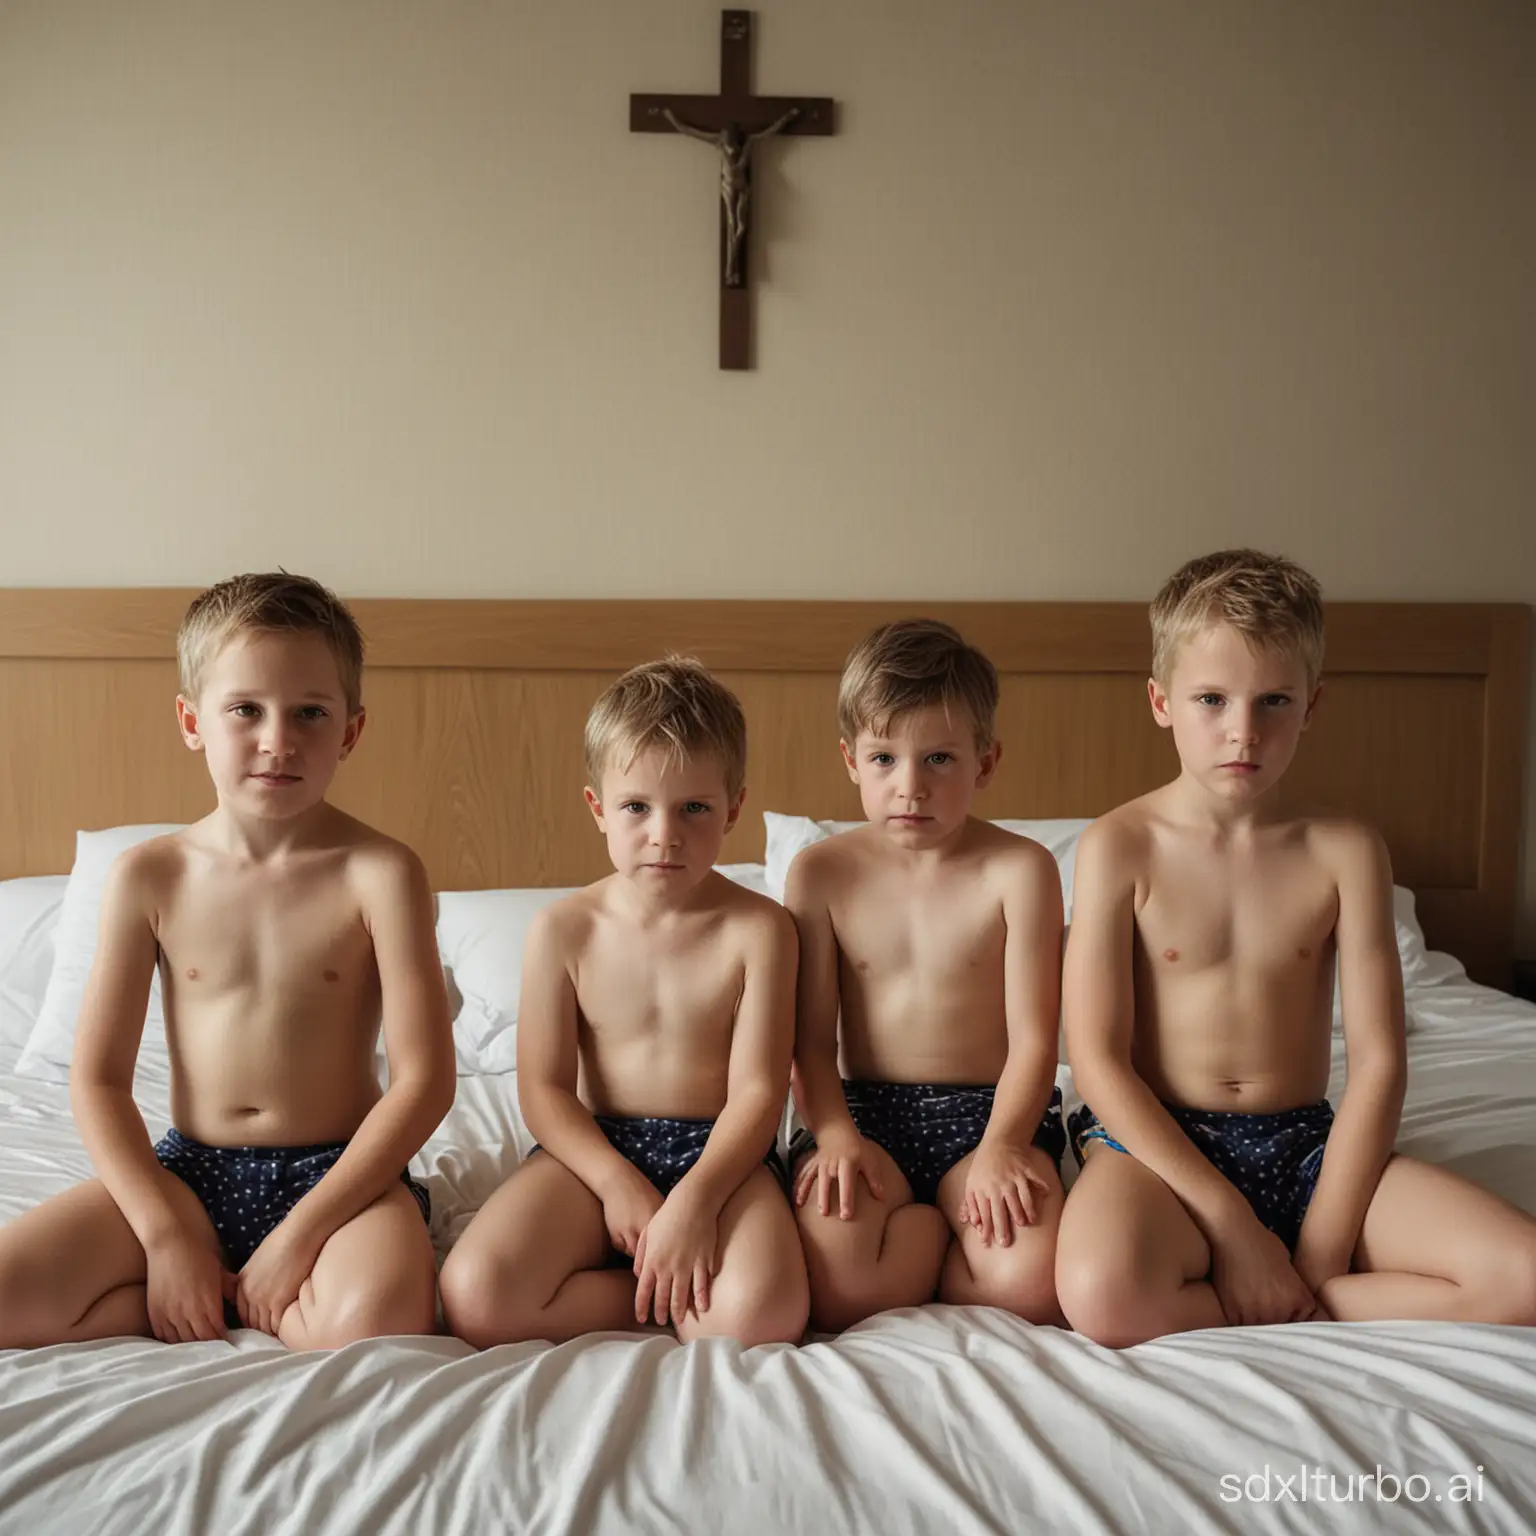 3 6-year-old boys in swimsuits sitting with 2 priests on a hotel bed. Gloomy light